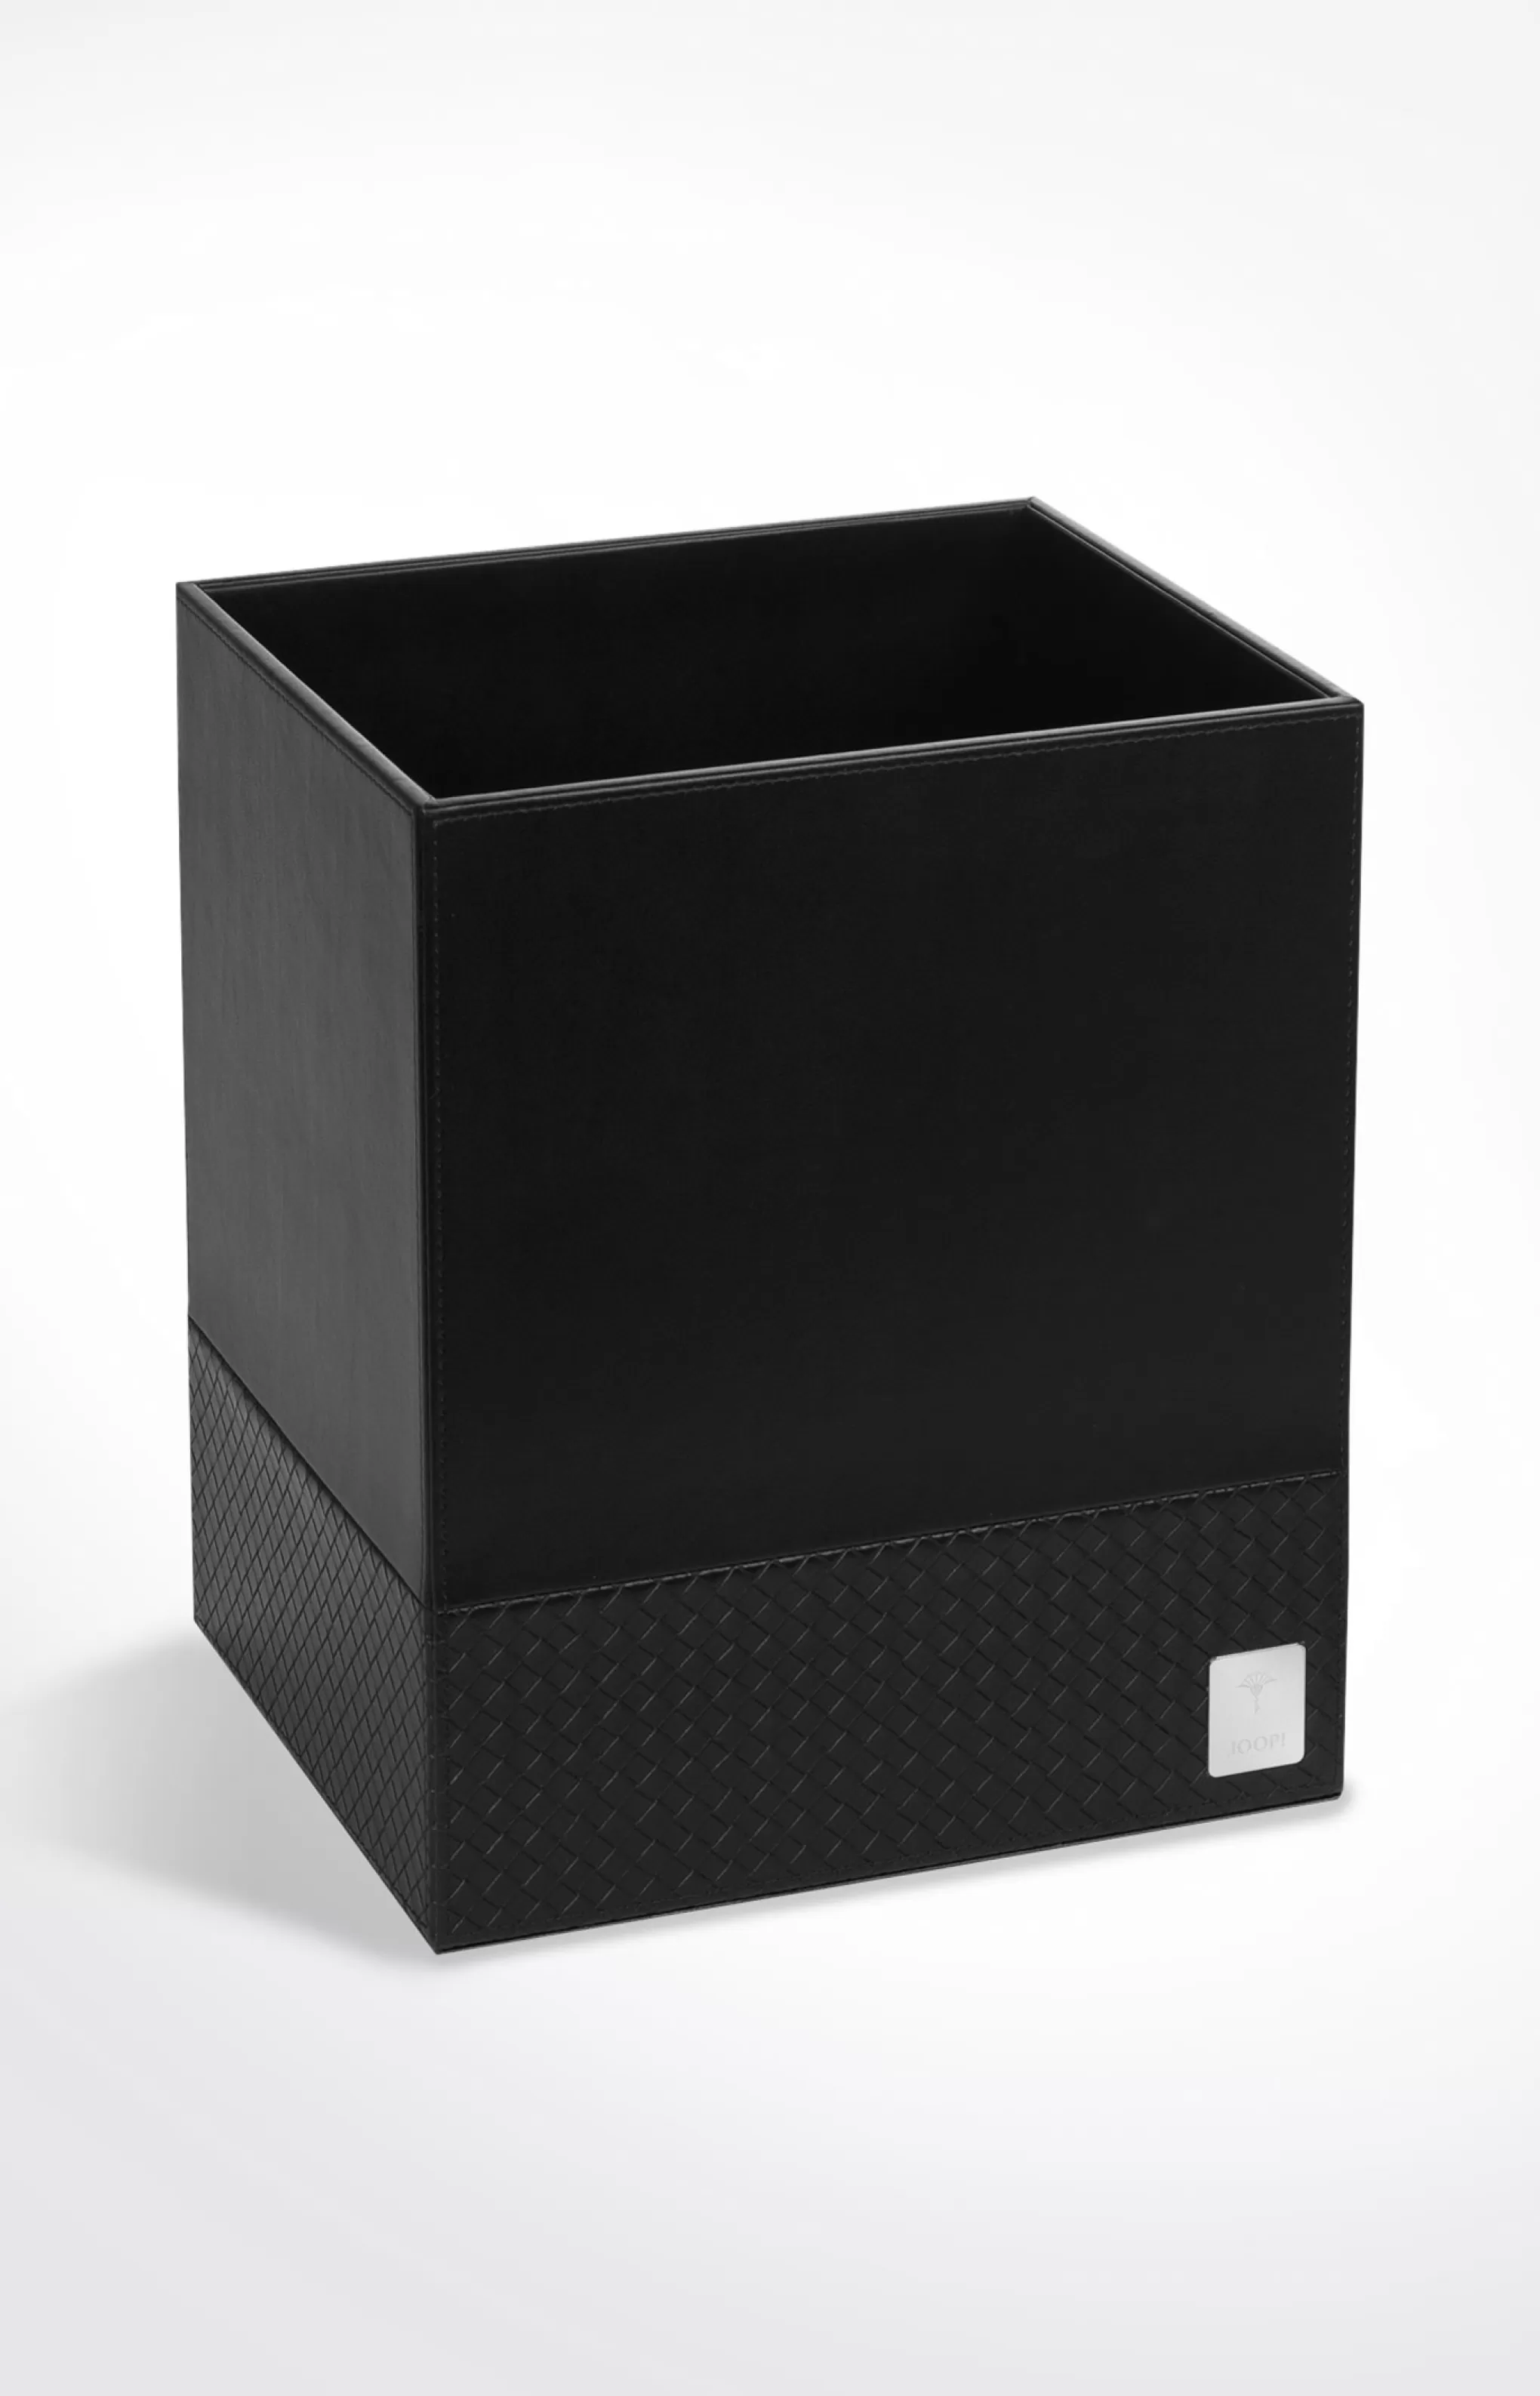 Bathroom Accessories | Discover Everything | Home Accessories*JOOP Bathroom Accessories | Discover Everything | Home Accessories Bathline waste basket, black